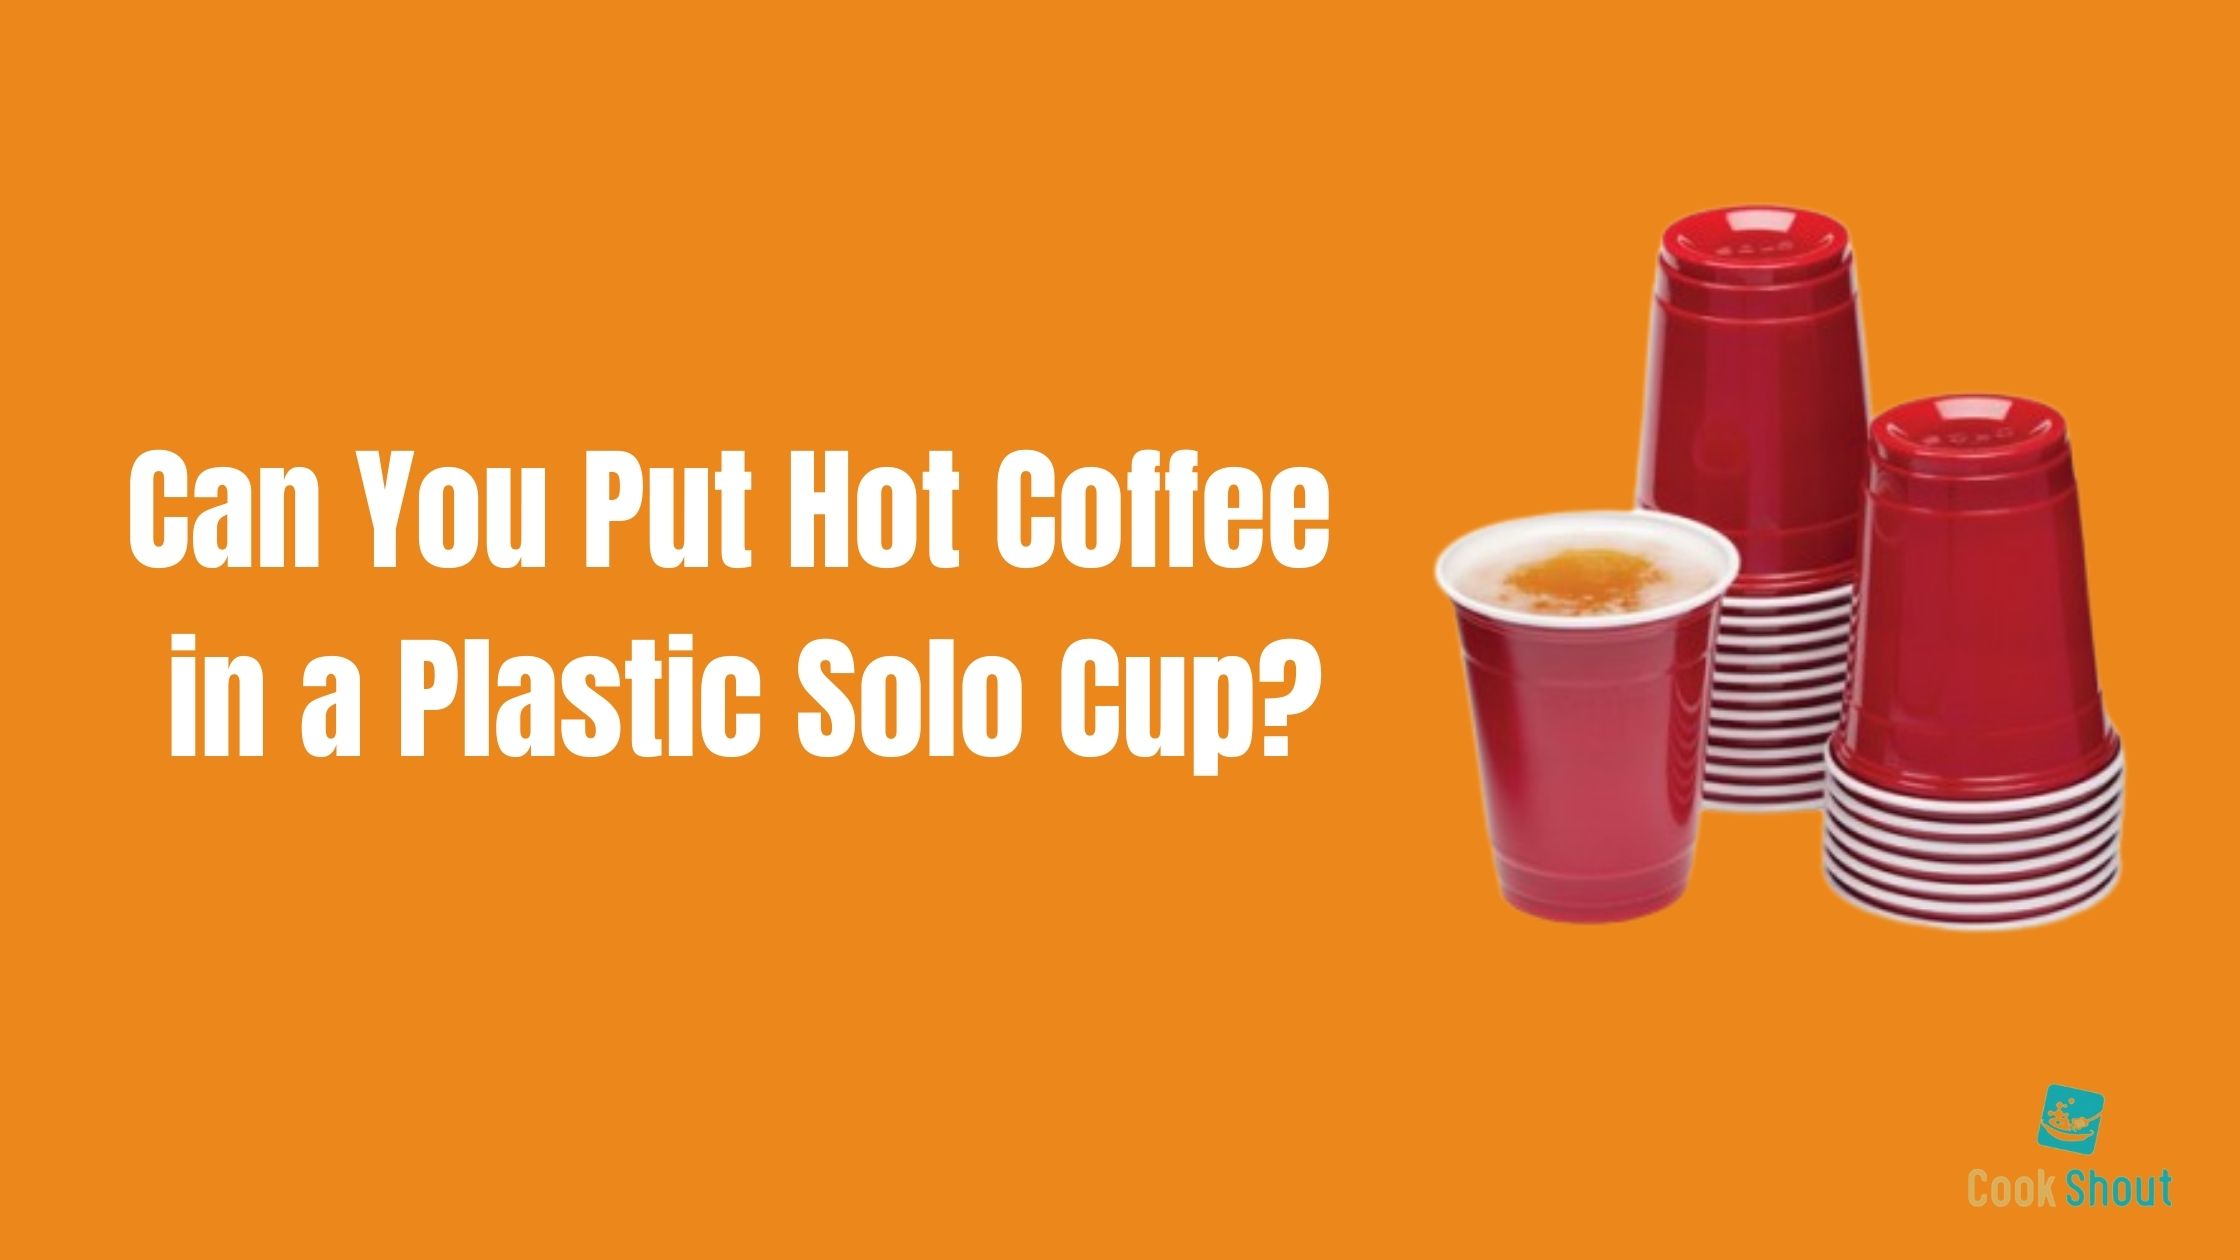 Can You Put Hot Coffee in a Plastic Solo Cup